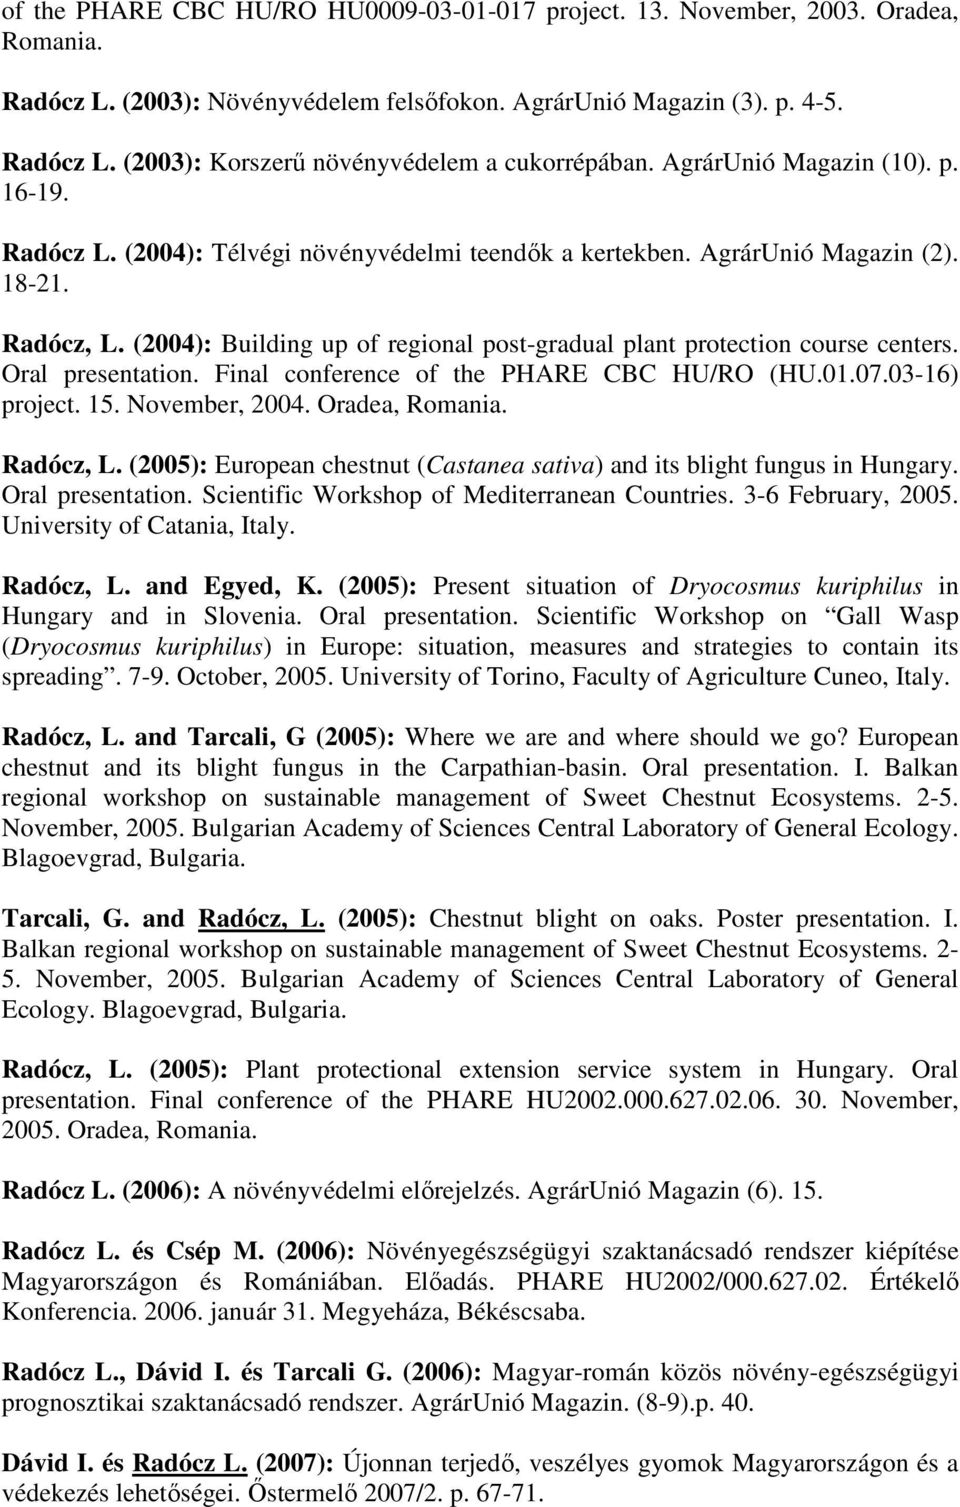 (2004): Building up of regional post-gradual plant protection course centers. Oral presentation. Final conference of the PHARE CBC HU/RO (HU.01.07.03-16) project. 15. November, 2004. Oradea, Romania.